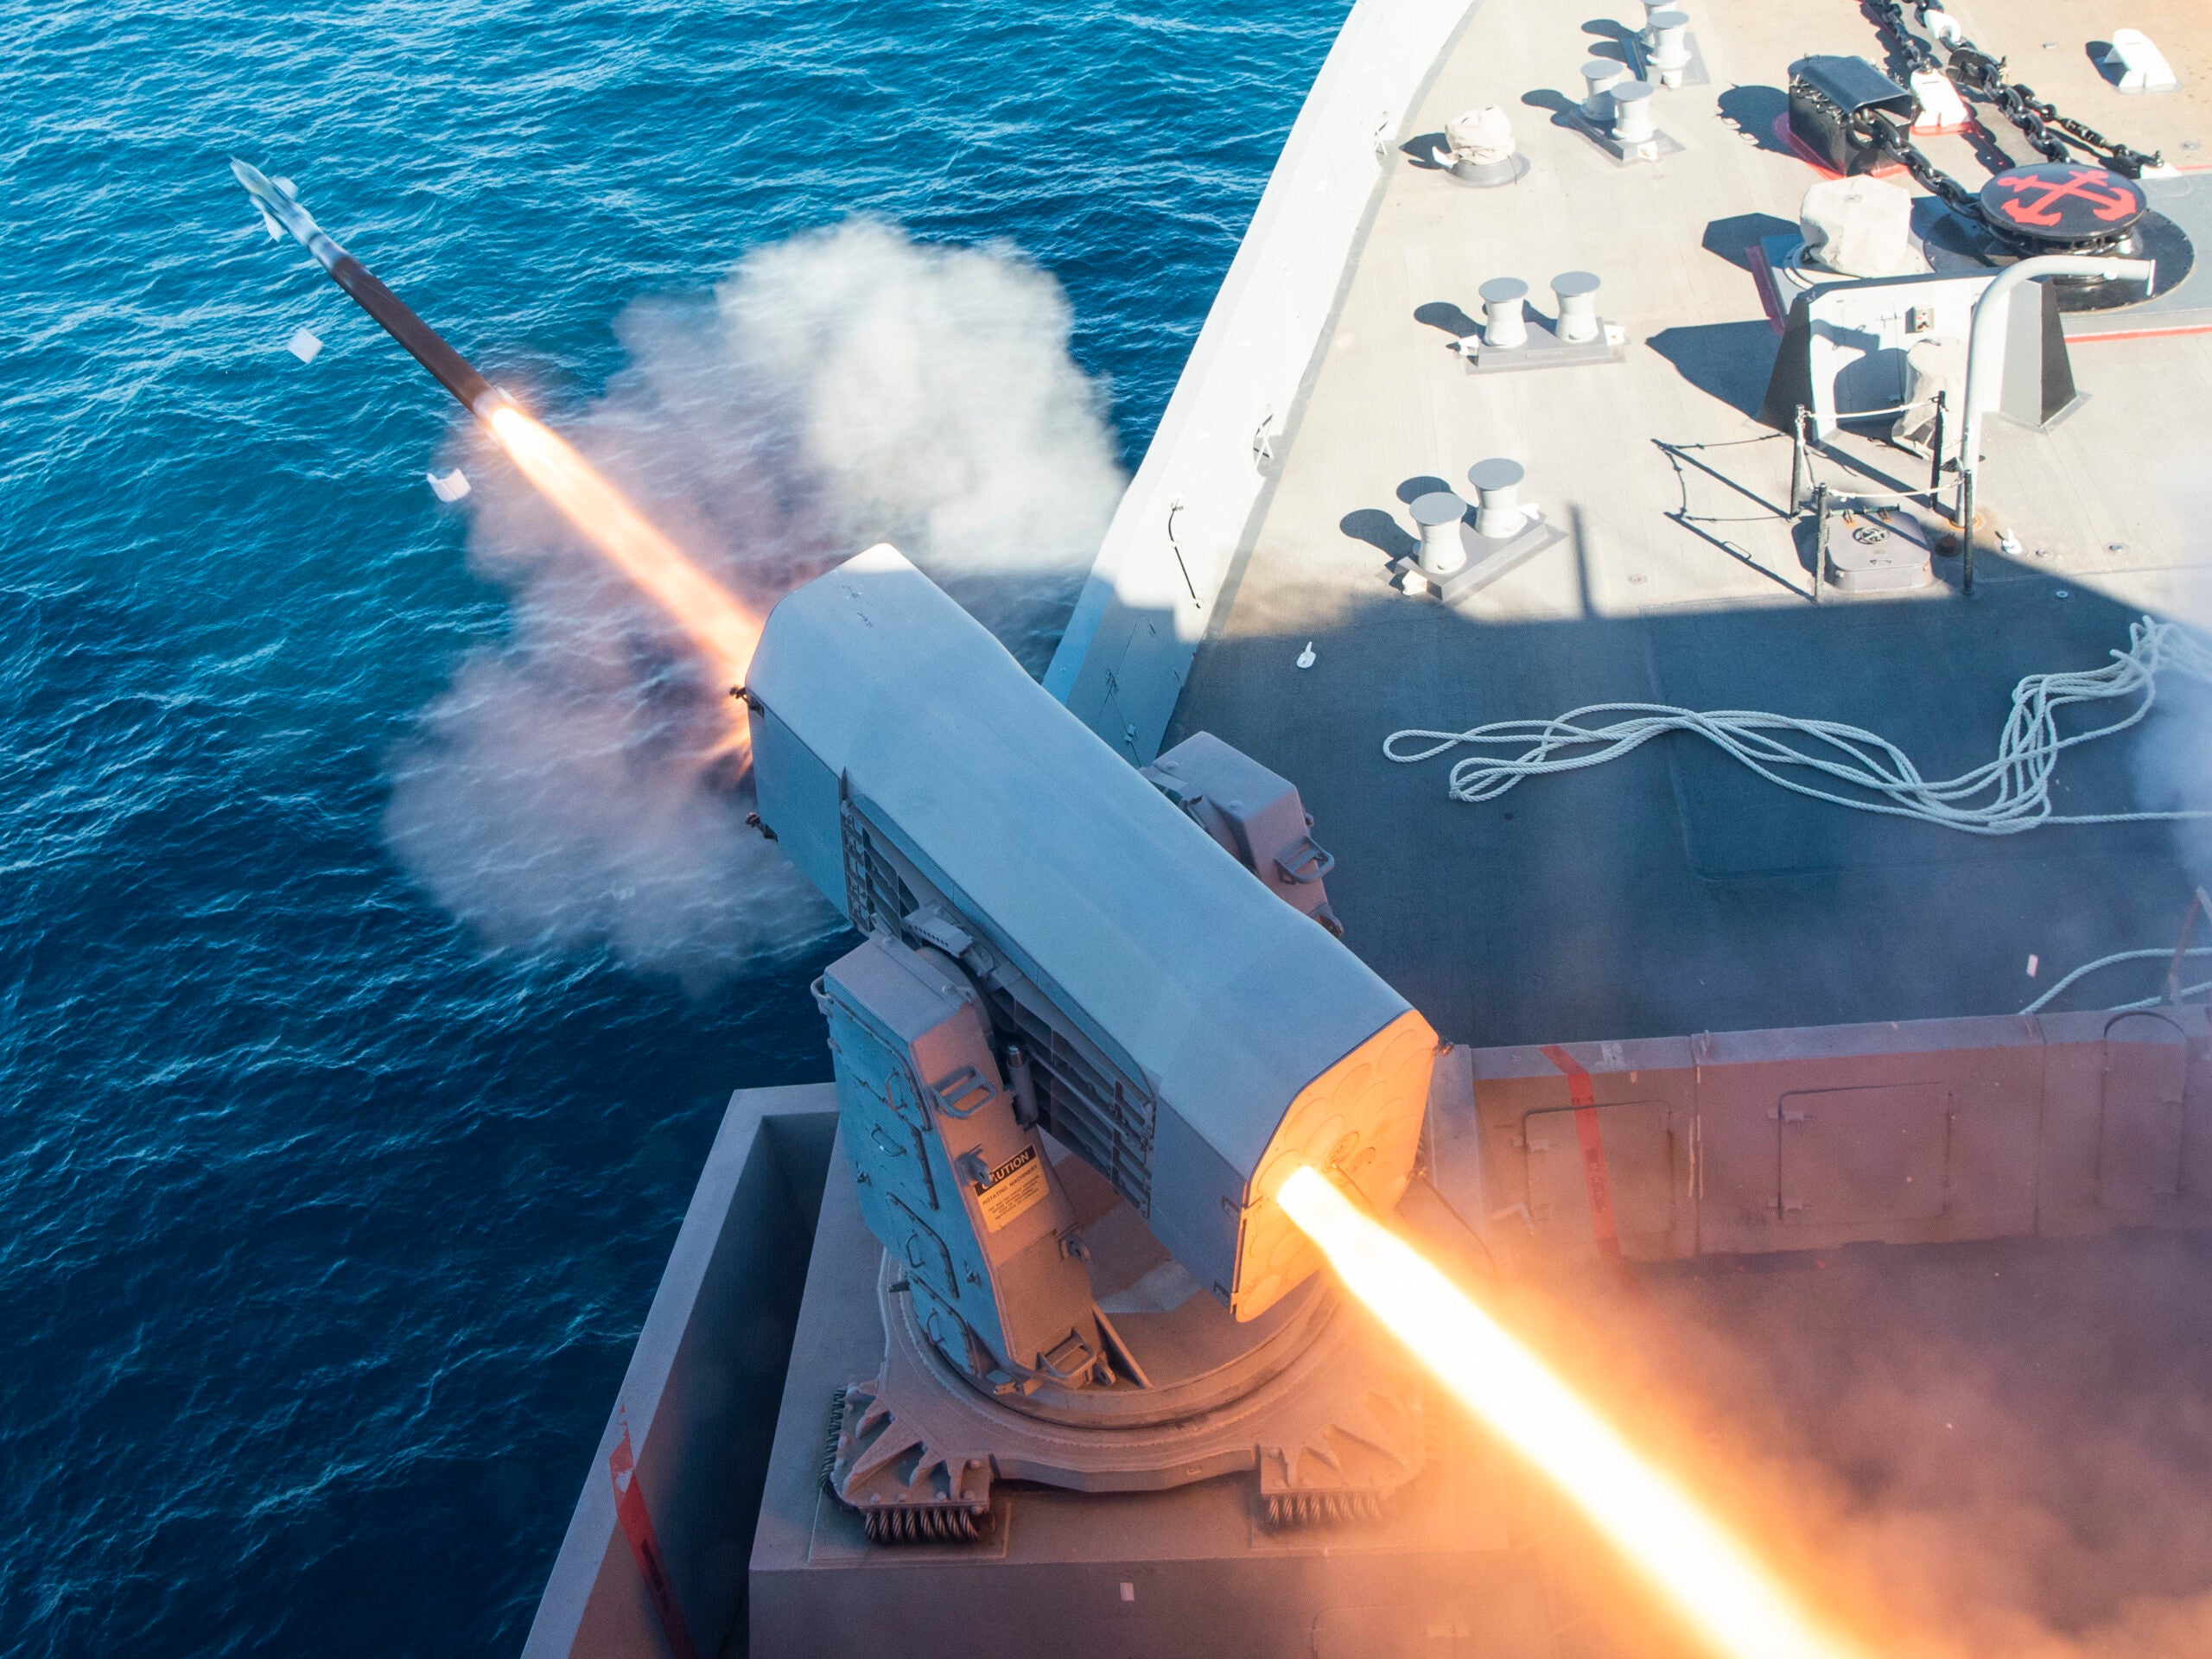 PACIFIC OCEAN (Feb. 11, 2022) The amphibious transport dock ship USS Anchorage (LPD 23) fires a RIM-116 Rolling Airframe Missile (RAM) during a live-fire exercise in the Pacific Ocean, Feb. 11. Anchorage is underway conducting routine operations in U.S. 3rd Fleet. (U.S. Navy Photo by Mass Communication Specialist 2nd Class Hector Carrera)